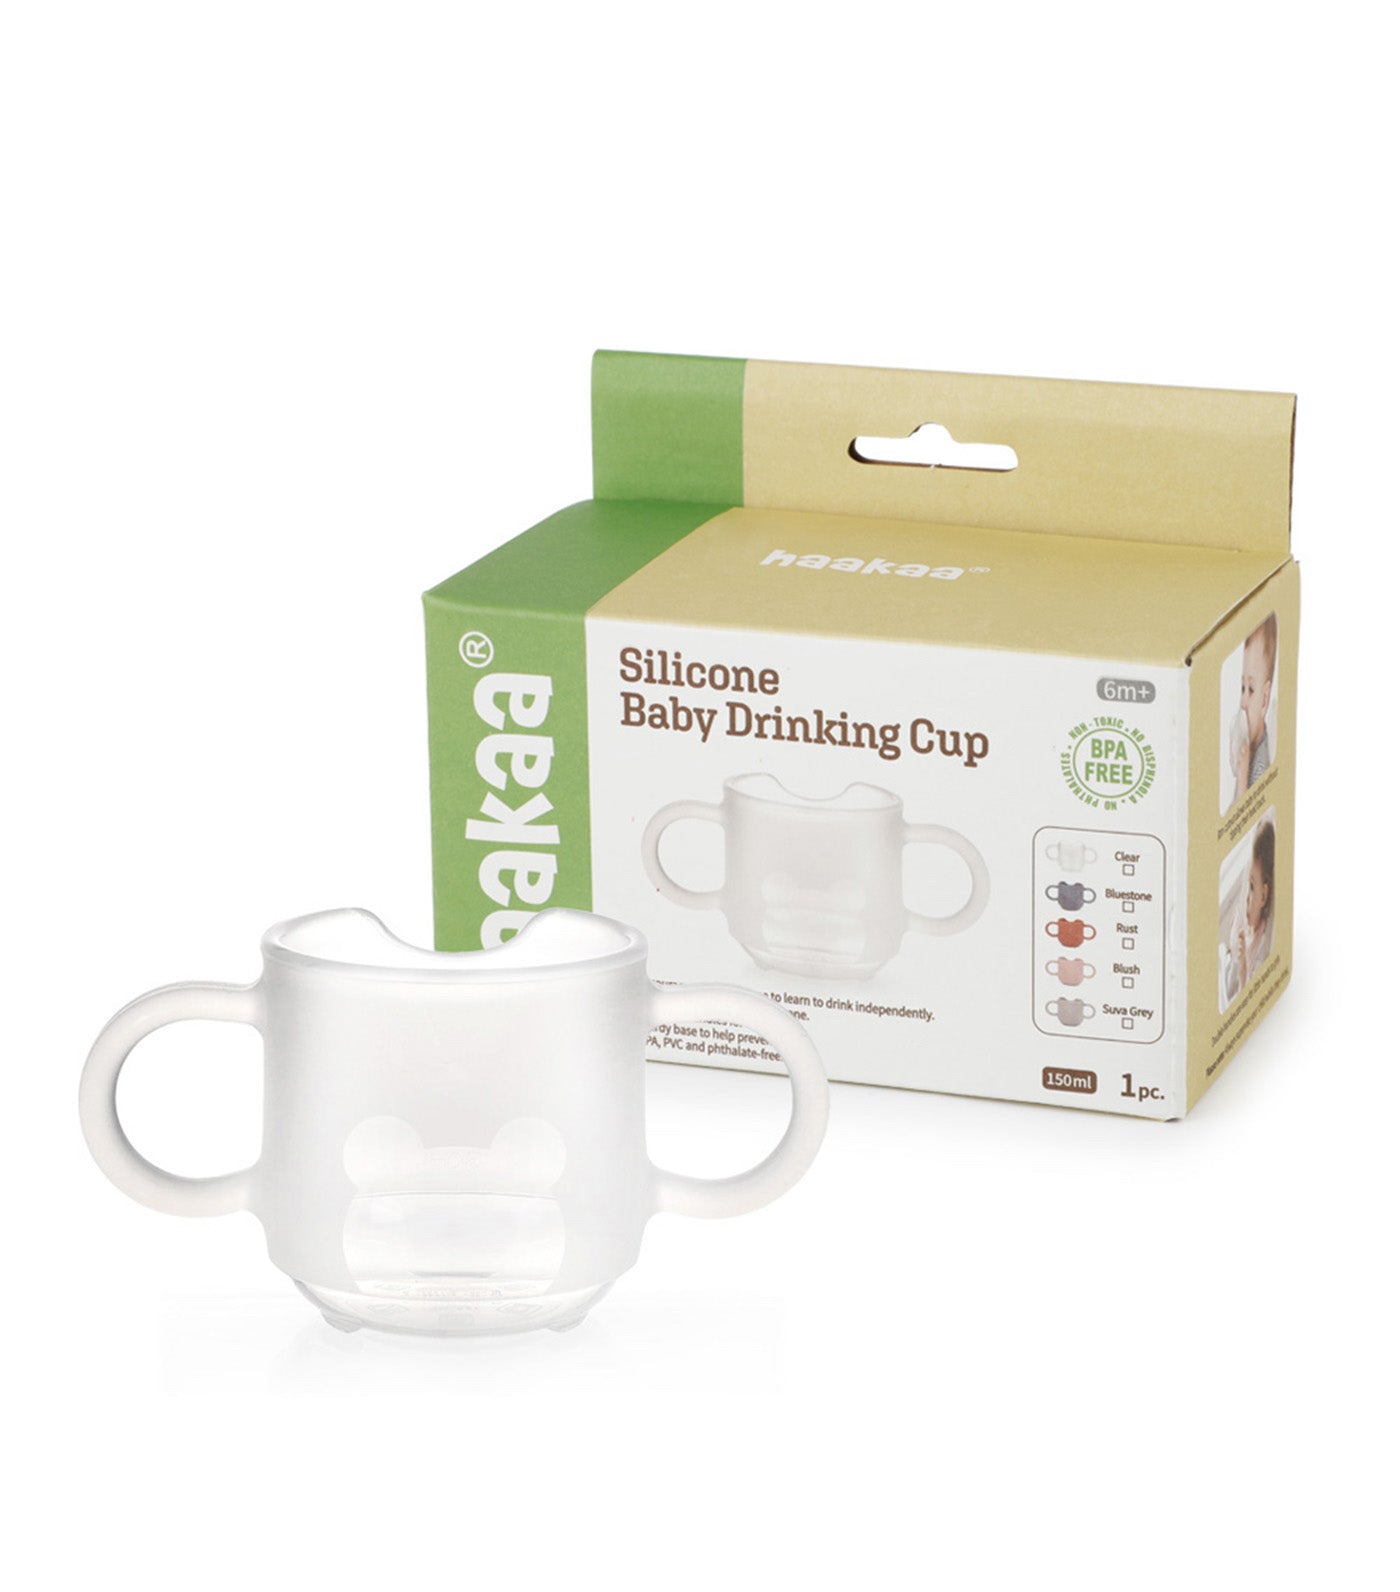 Silicone Baby Drinking Cup 1pk